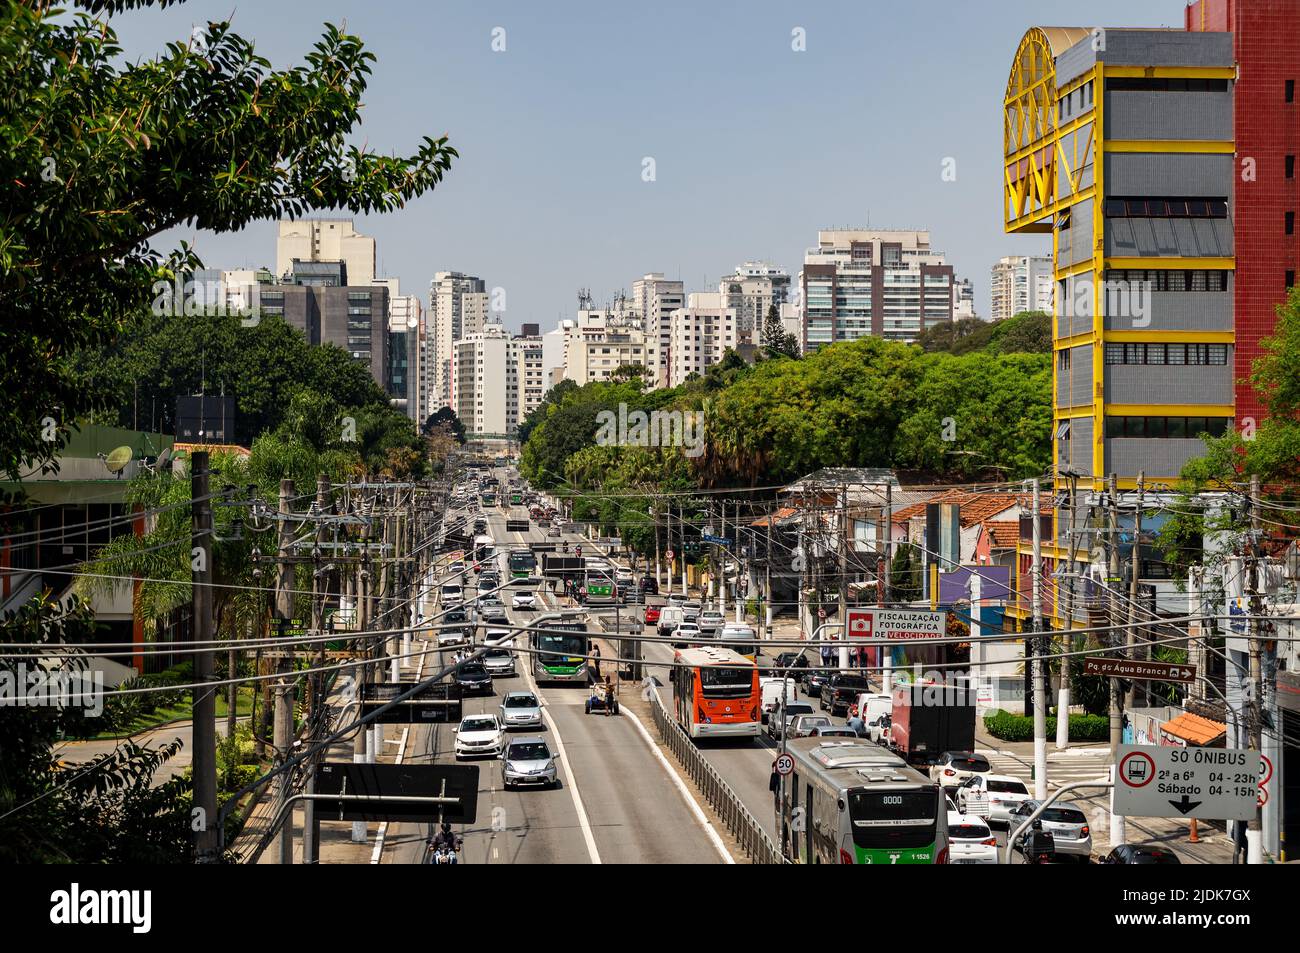 Heavy traffic passing by Francisco Matarazzo avenue in Agua Branca district in a normal business day with lots of skyscrapers at the back. Stock Photo